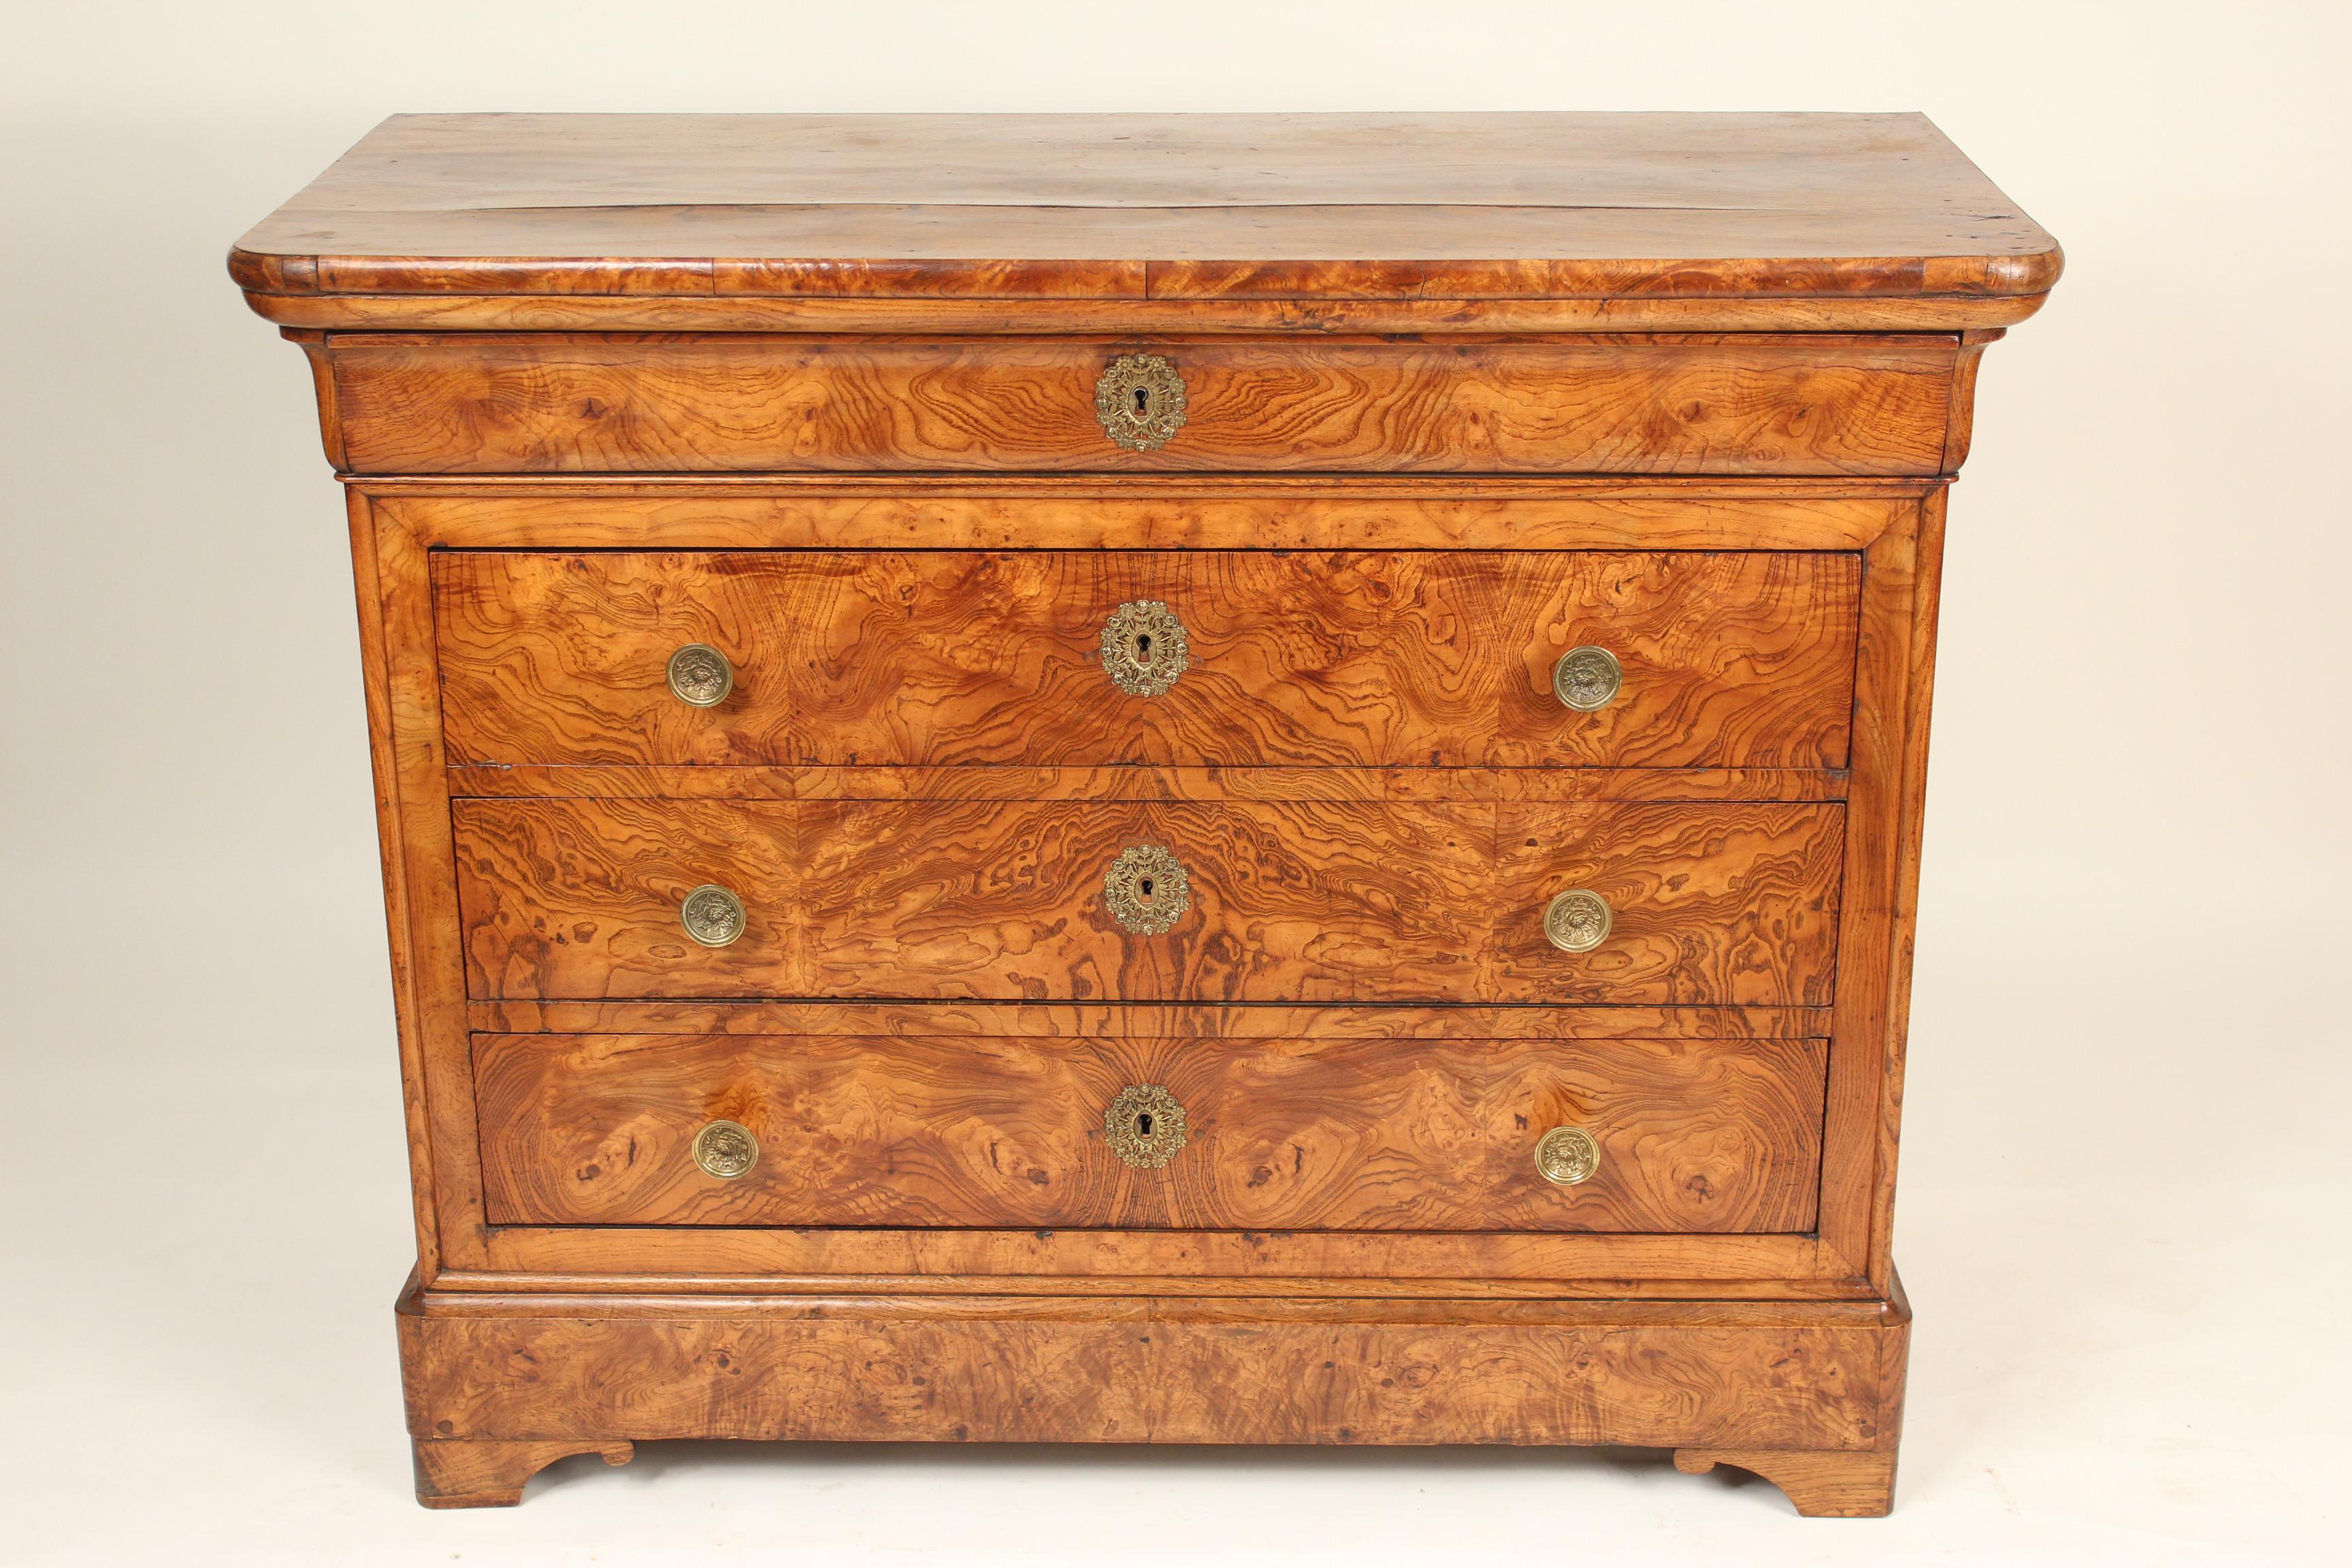 Louis Philippe burl ash chest of drawers, circa 1840. This chest has exquisitely grained burl ash.